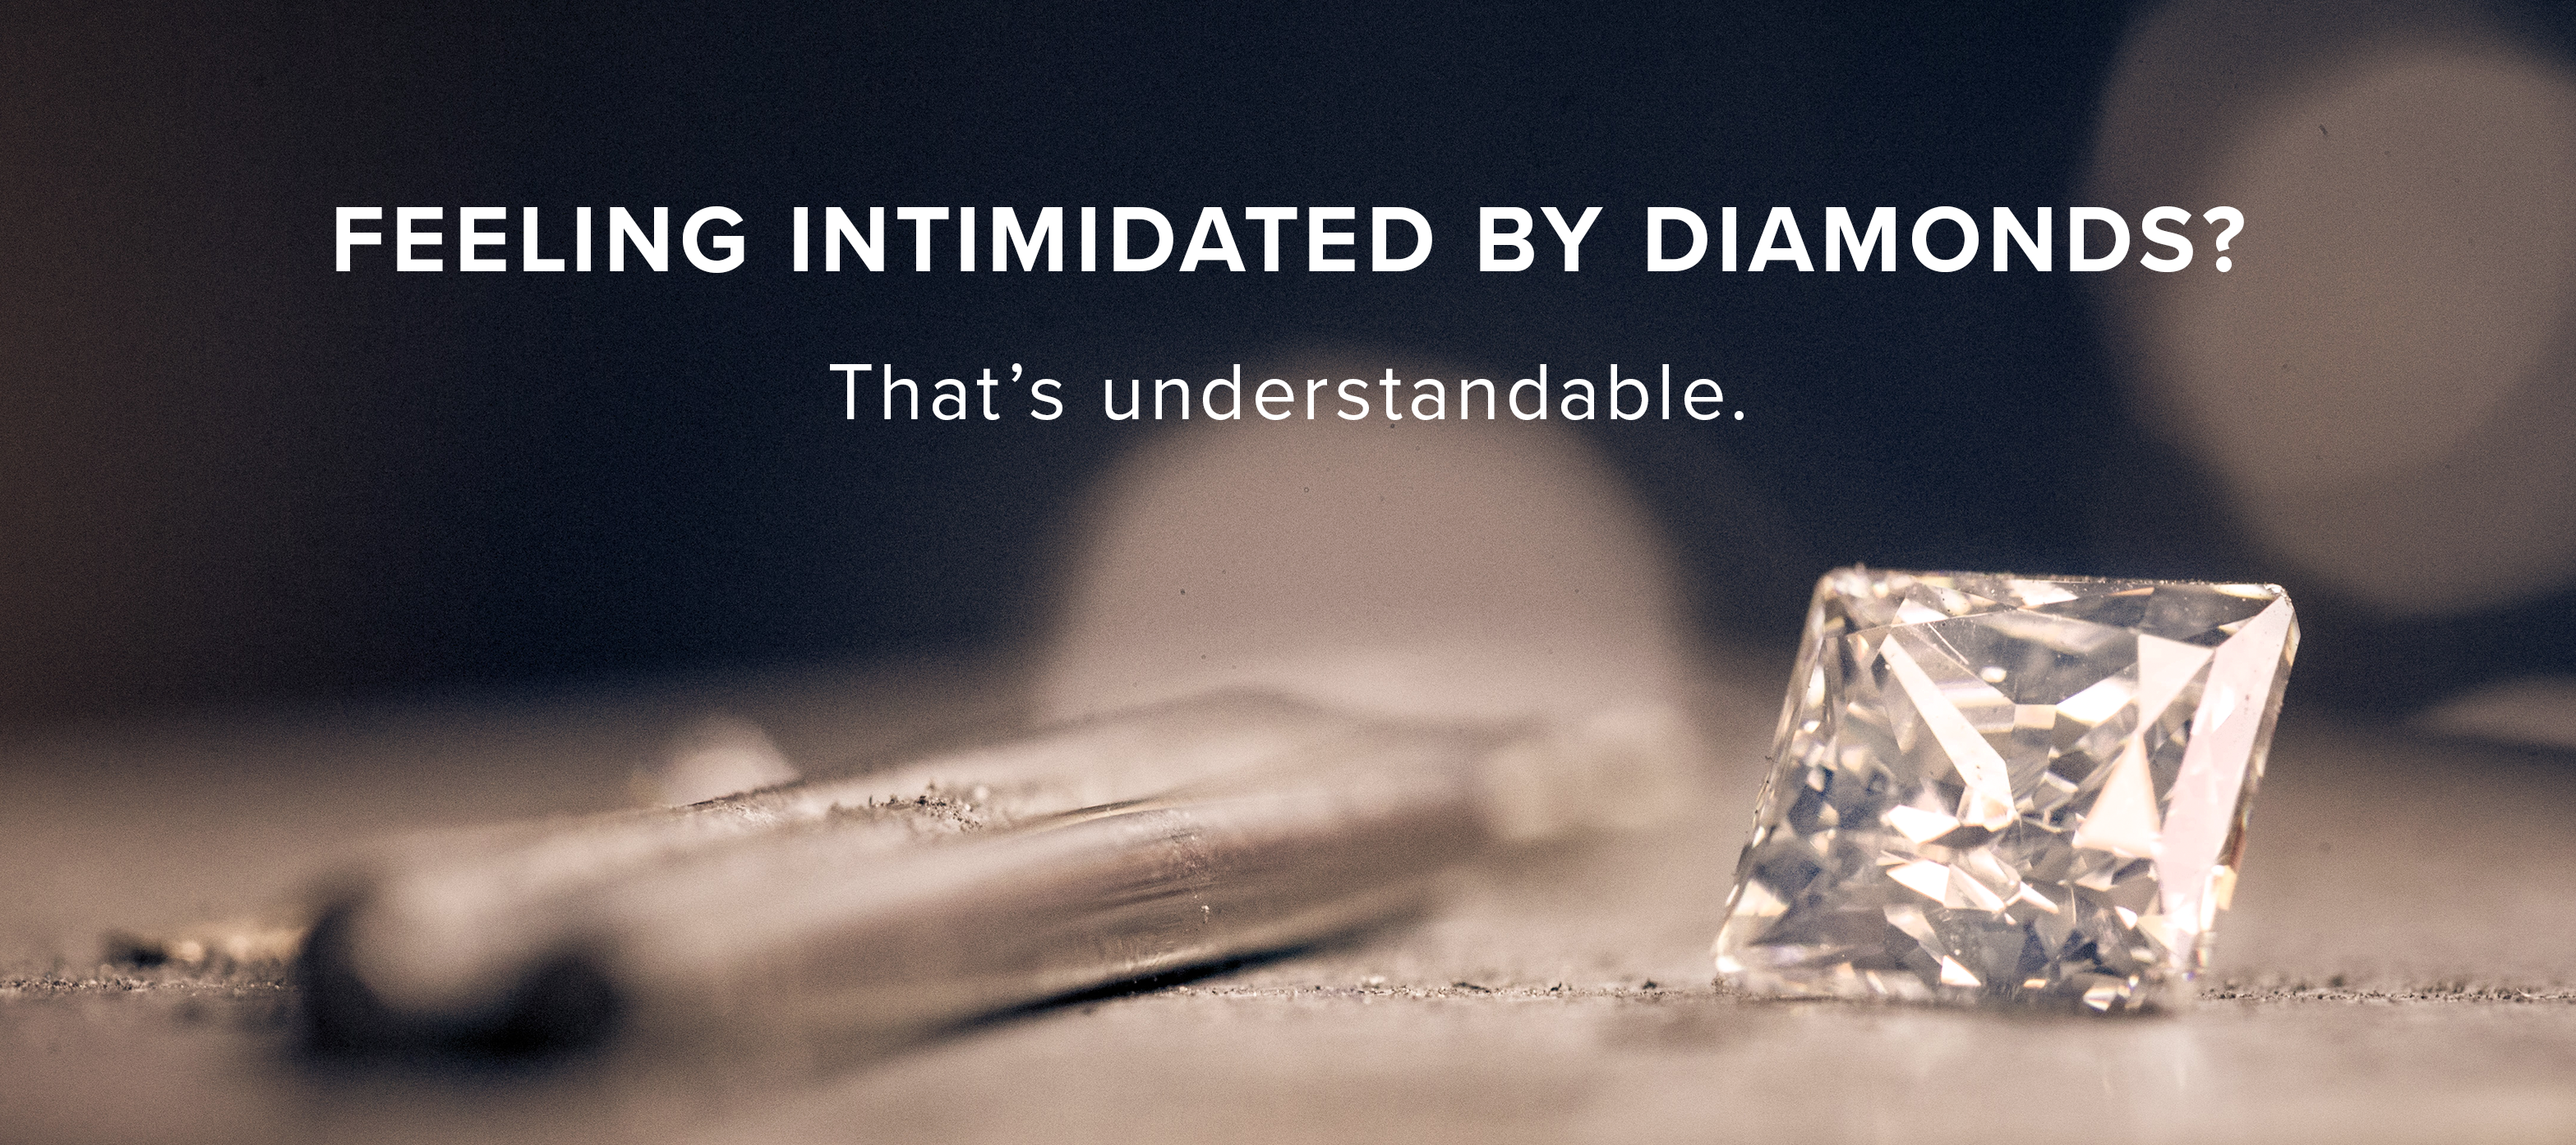 Feeling intimidated by diamonds? That’s understandable.